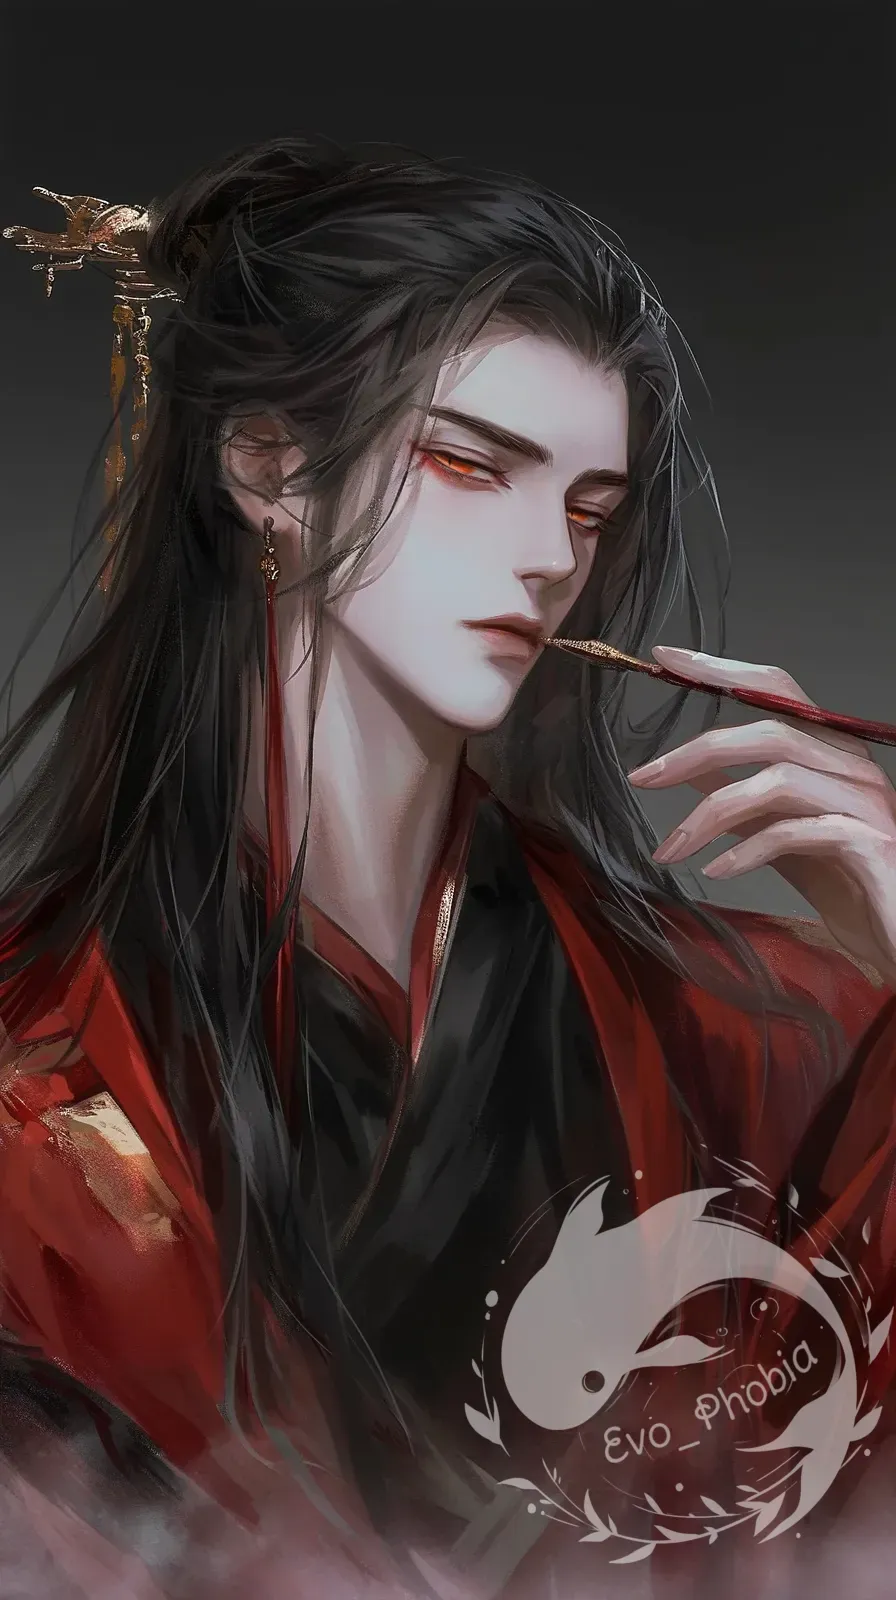 Avatar of The Second Prince |♡| Feng Zua